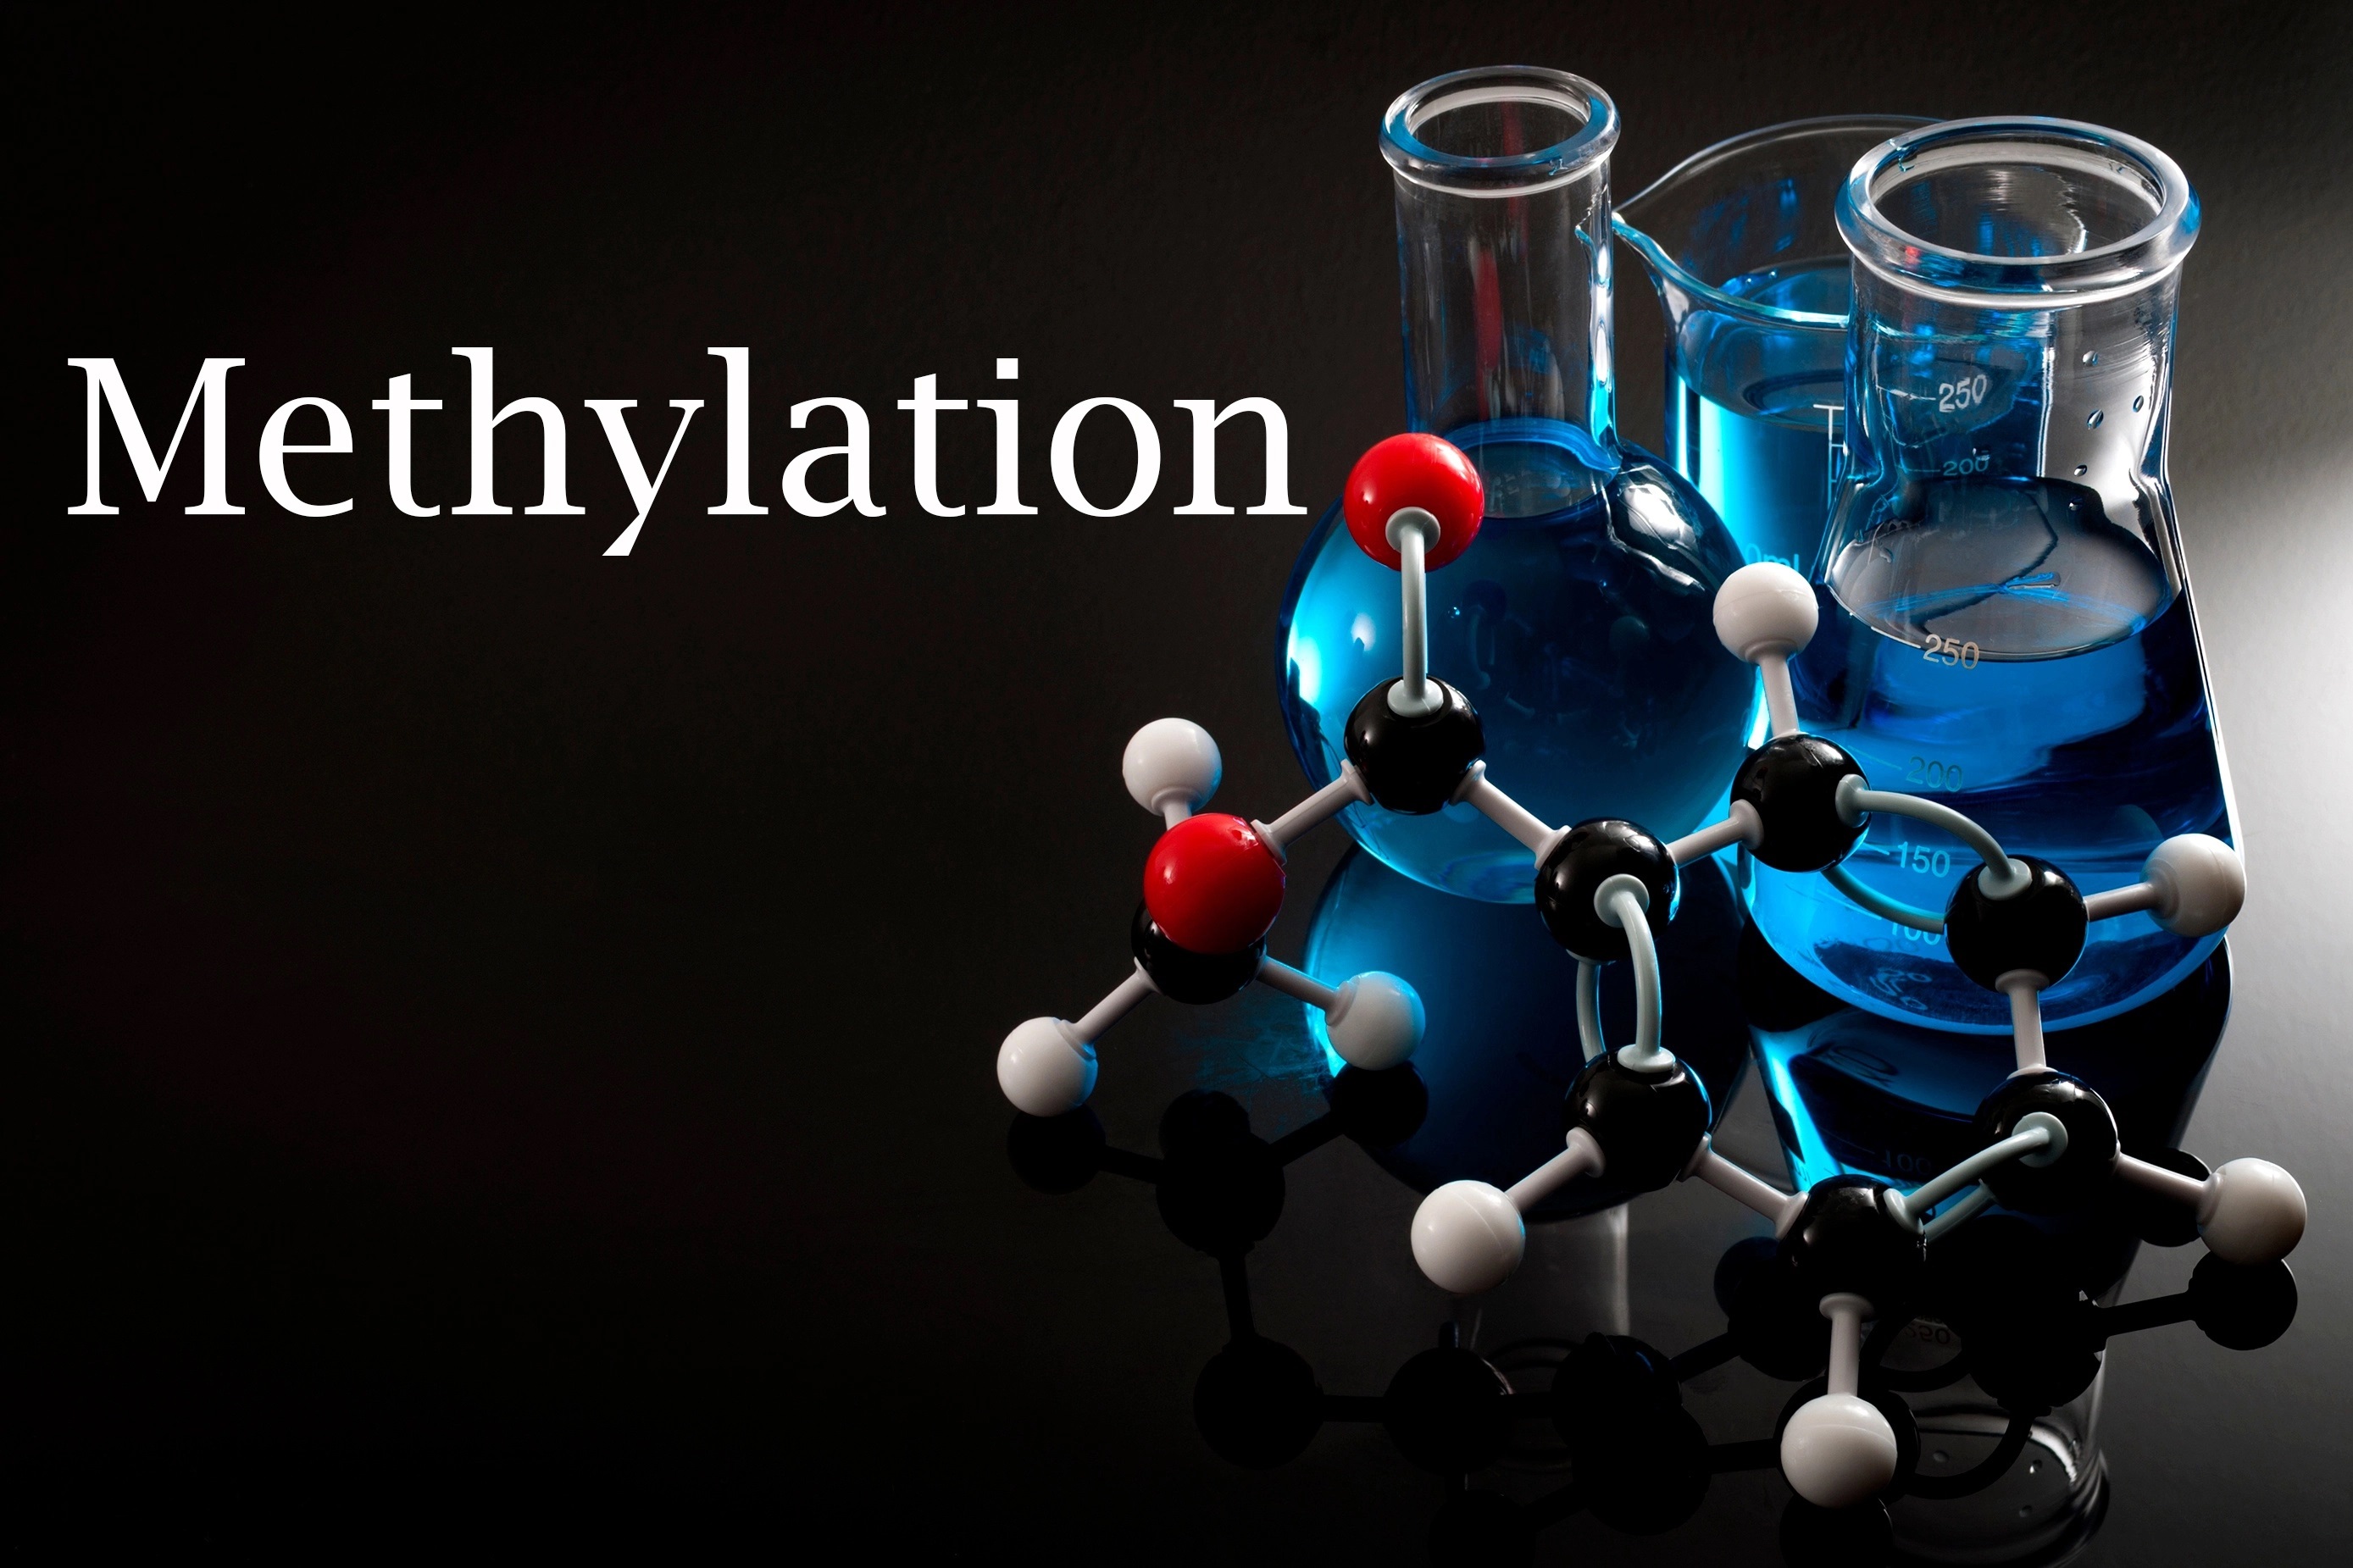 What is Methylation and Why Should You Care About It?